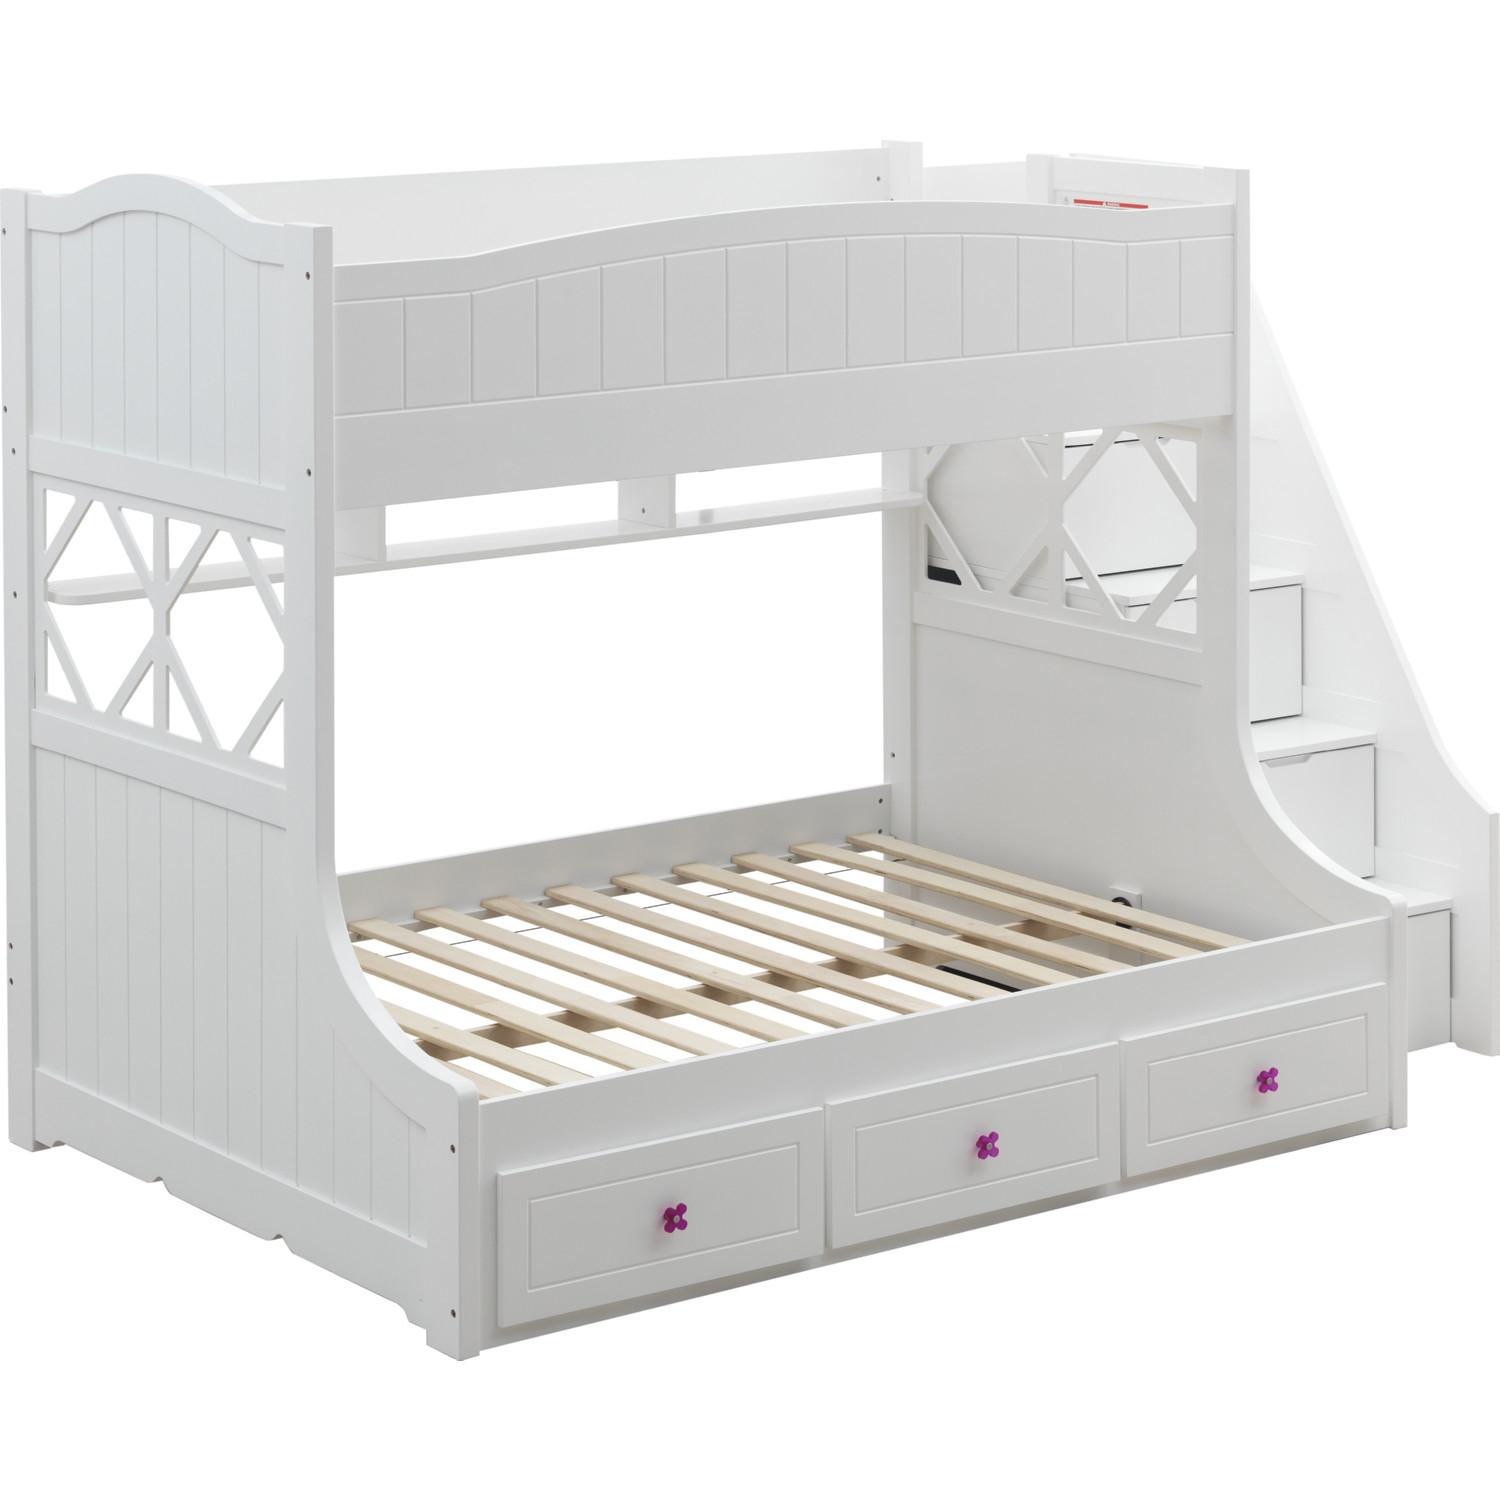 

    
Simple White Wood Bunk Bed Kid's Bedroom Set by Acme Meyer 38150-4pcs
